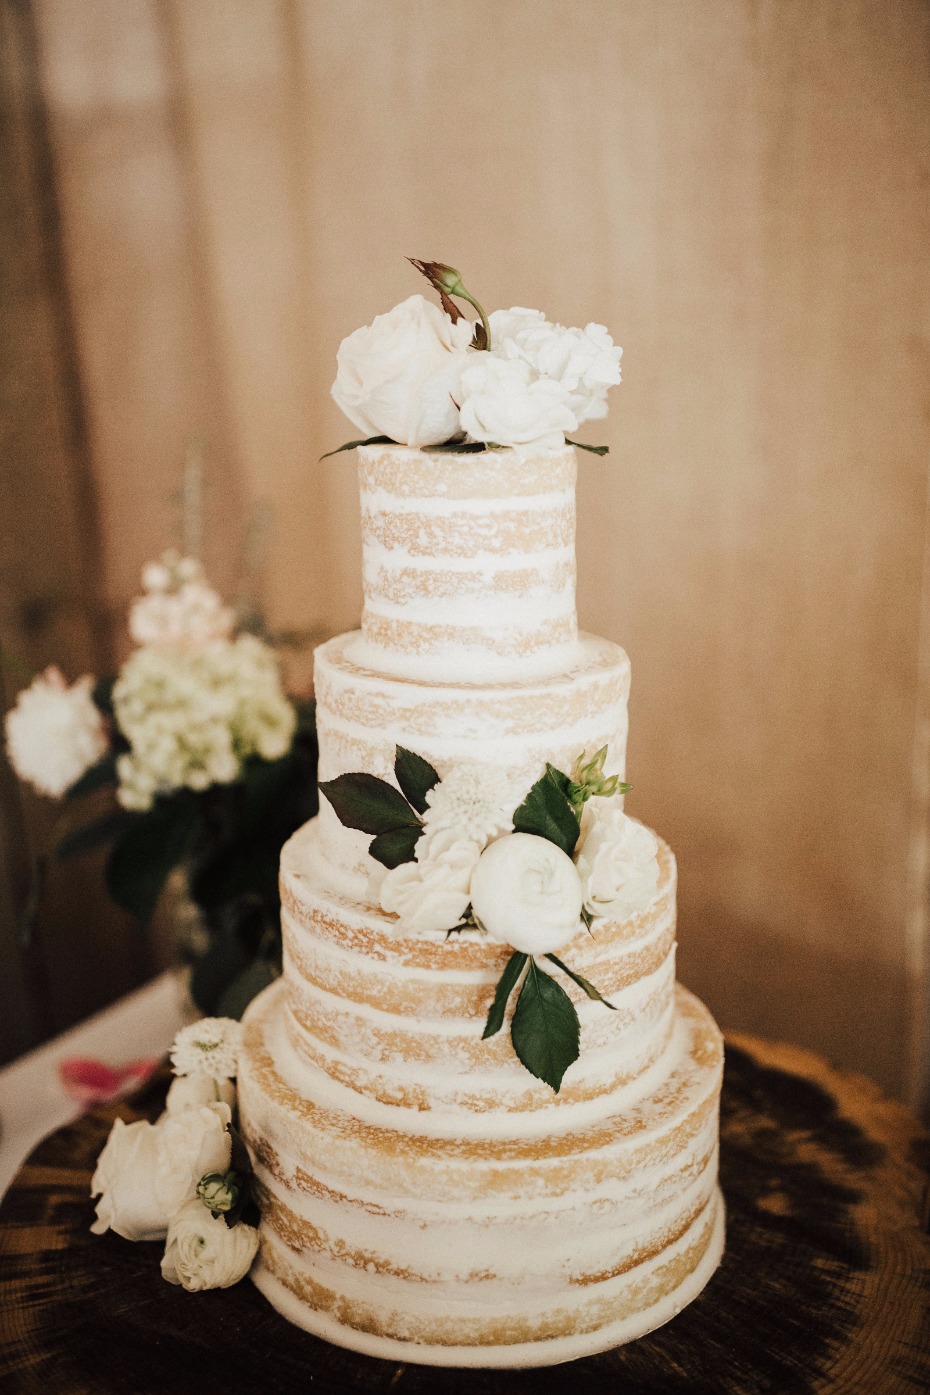 Naked wedding cake with flowers and powdered sugar